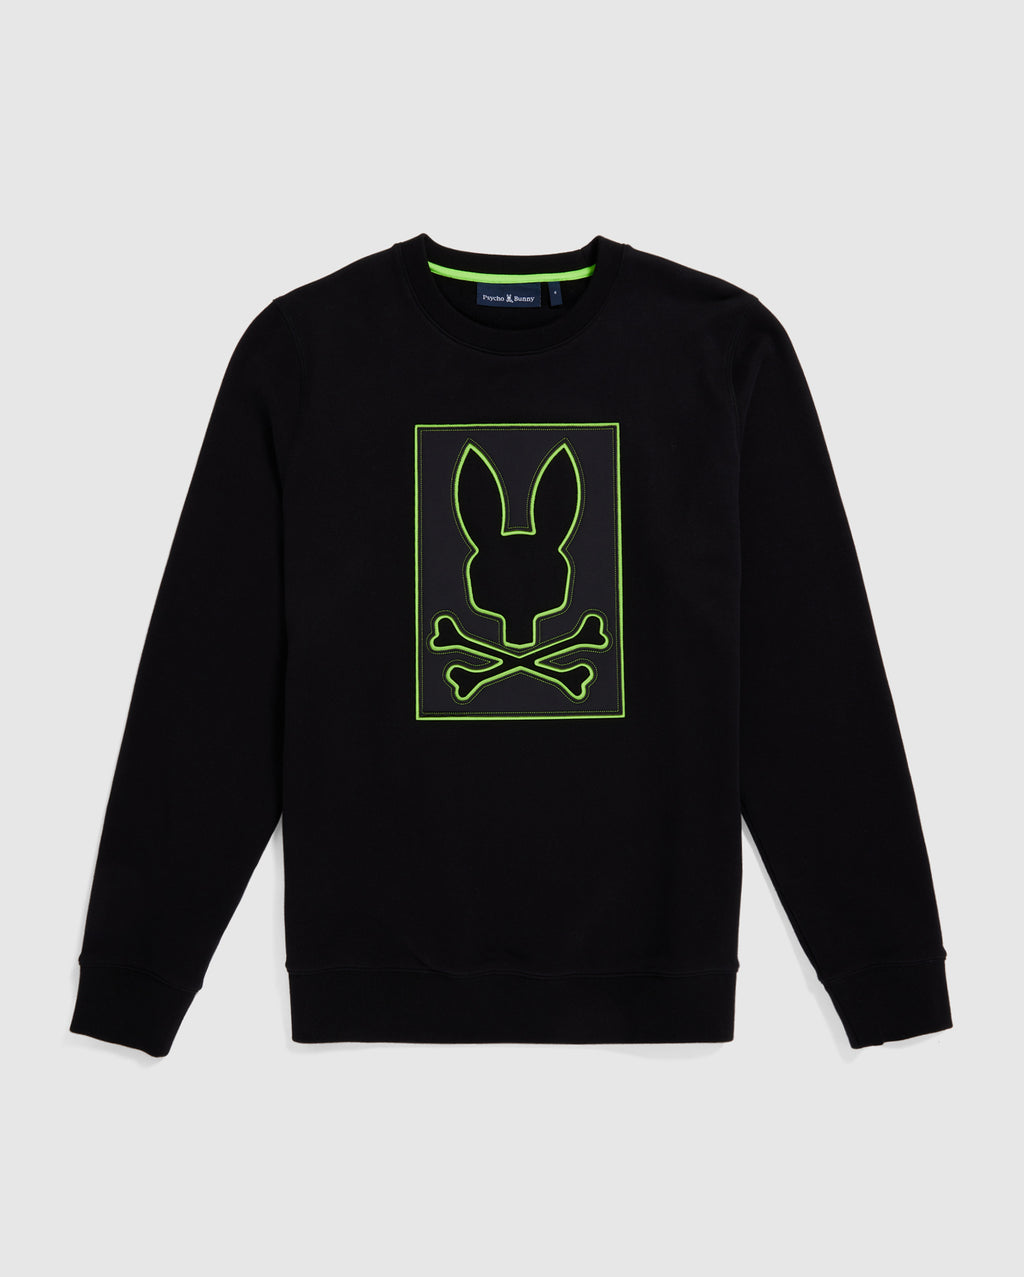 Relaxed Dream Bunny T-shirt